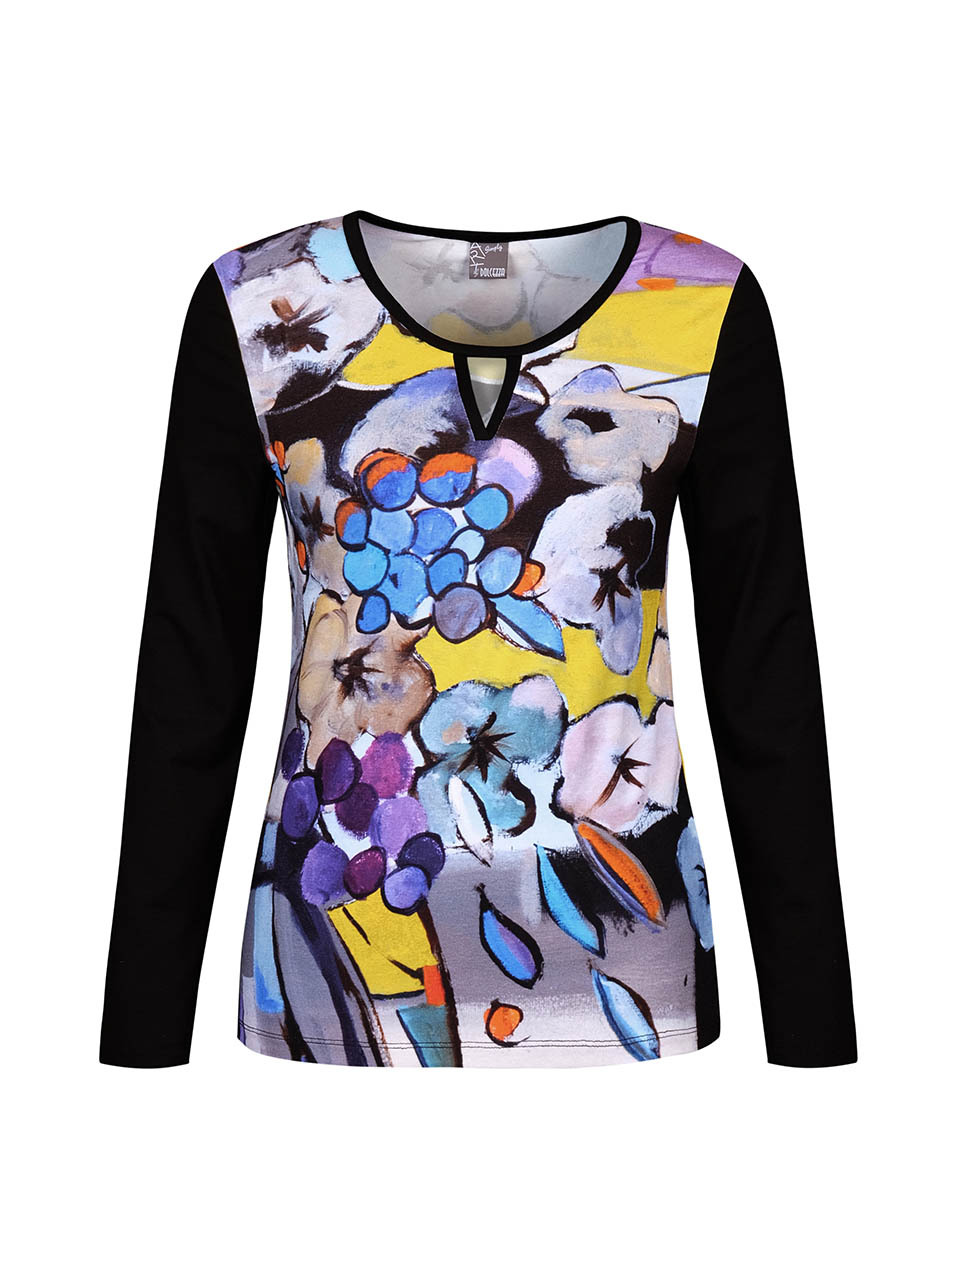 Simply Art Dolcezza: Still Life Keyhole Abstract Art Top (3 Left!) Dolcezza_Simplyart_71640_N